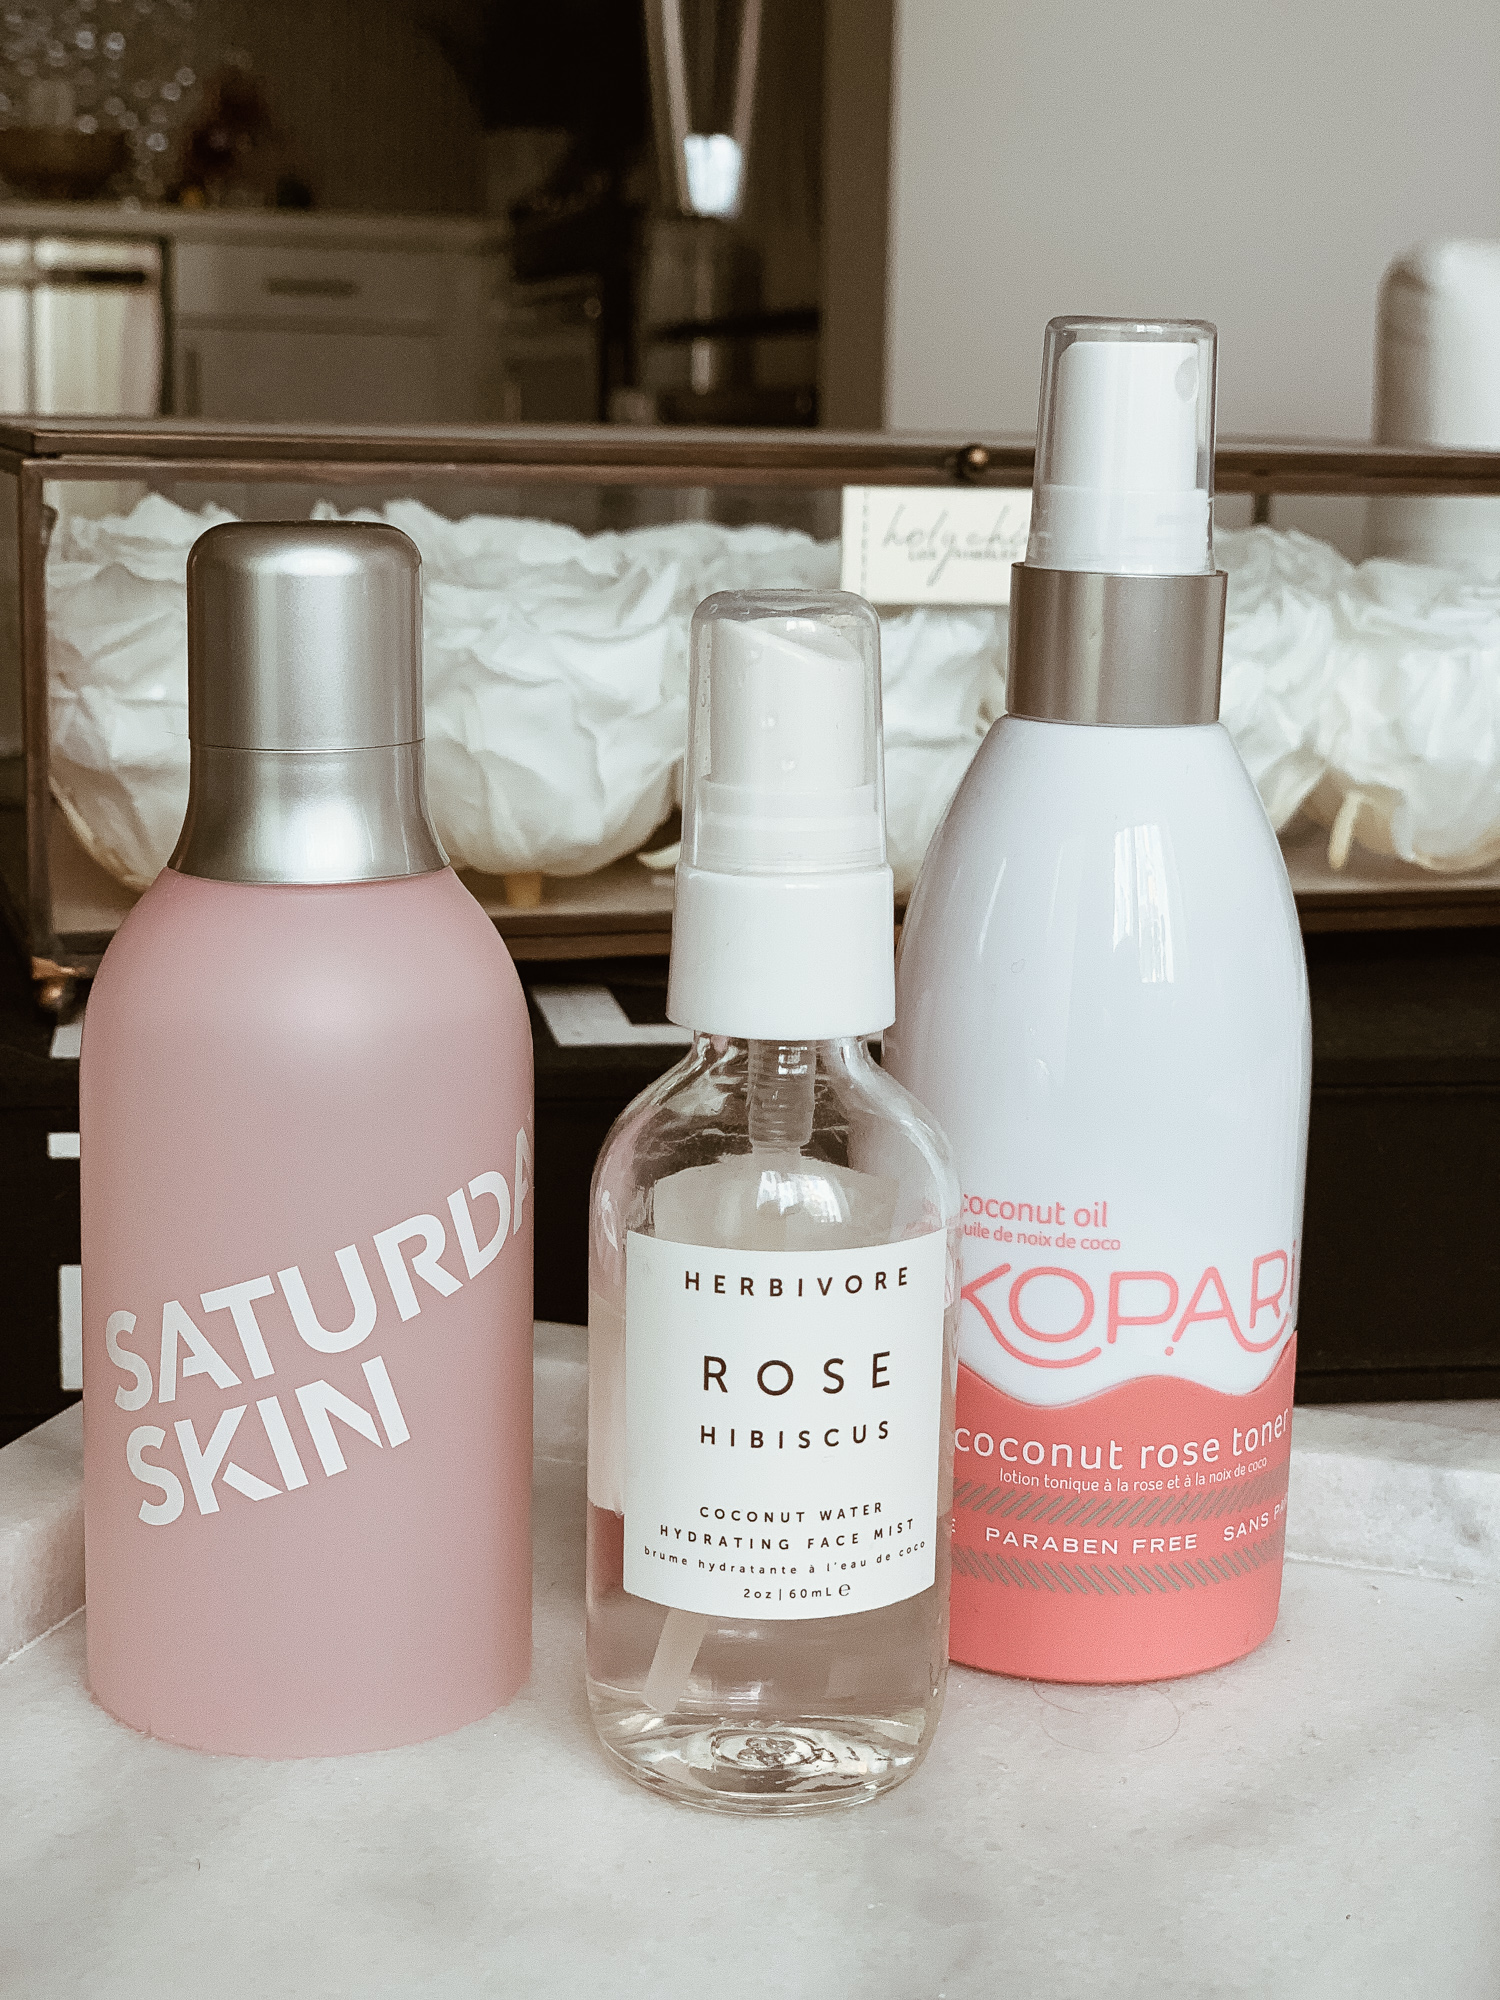 3 Face Mists I'm Loving Right Now | Coconut Rose Toner by Kopari, Rose Hibiscus Face Mist by Herbivore, Saturday Skin Face Mist | Skincare | Blondie in the City by Hayley Larue